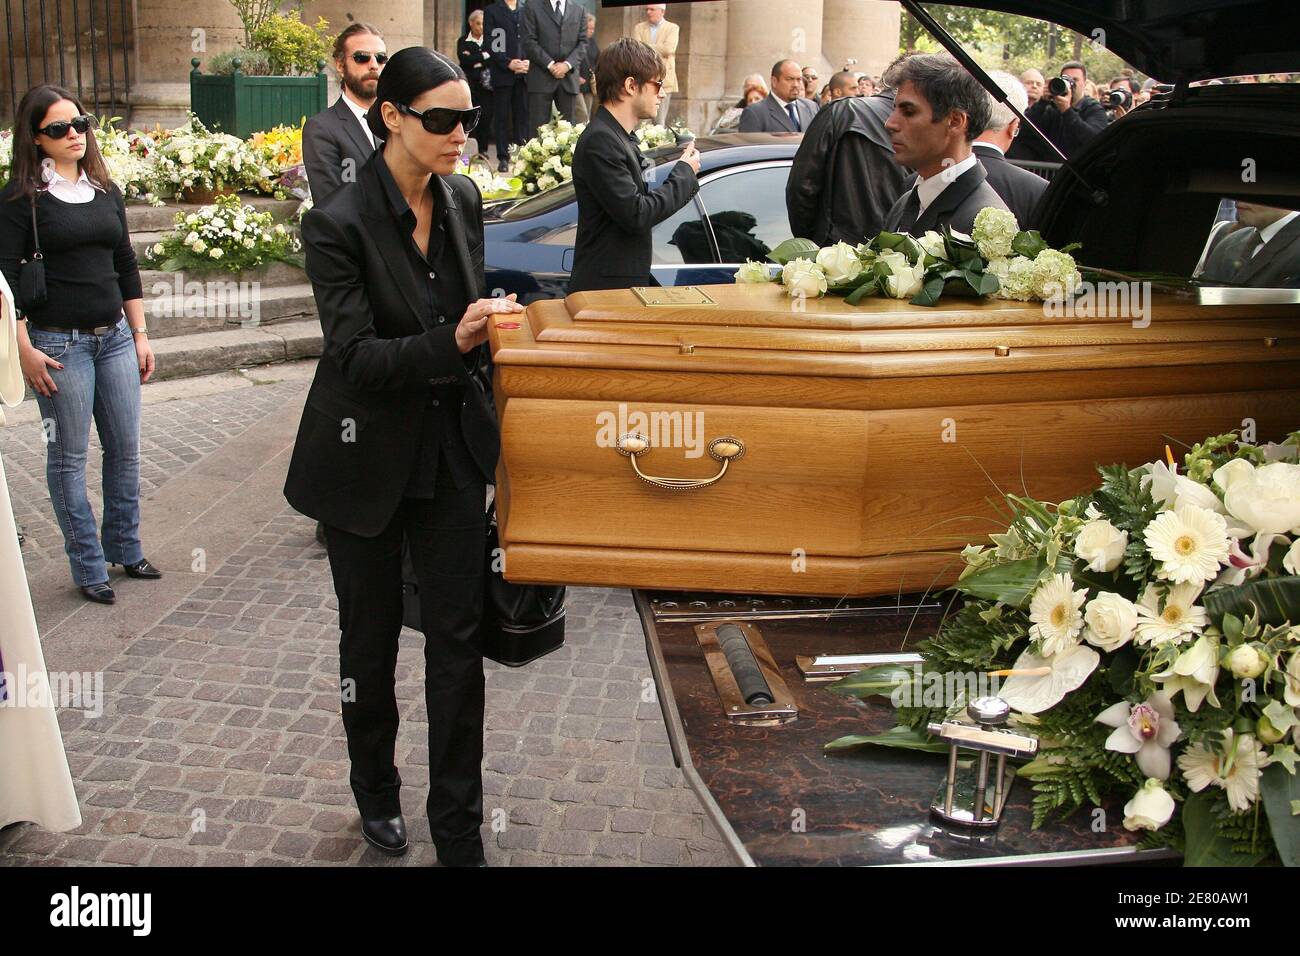 Monica Bellucci during the funeral service for French actor Jean-Pierre  Cassel at Saint-Eustache church in Paris, France on April 26, 2007. Cassel  died of cancer at 74 last Thursday. Photo by Mousse-Nebinger/ABACAPRESS.COM